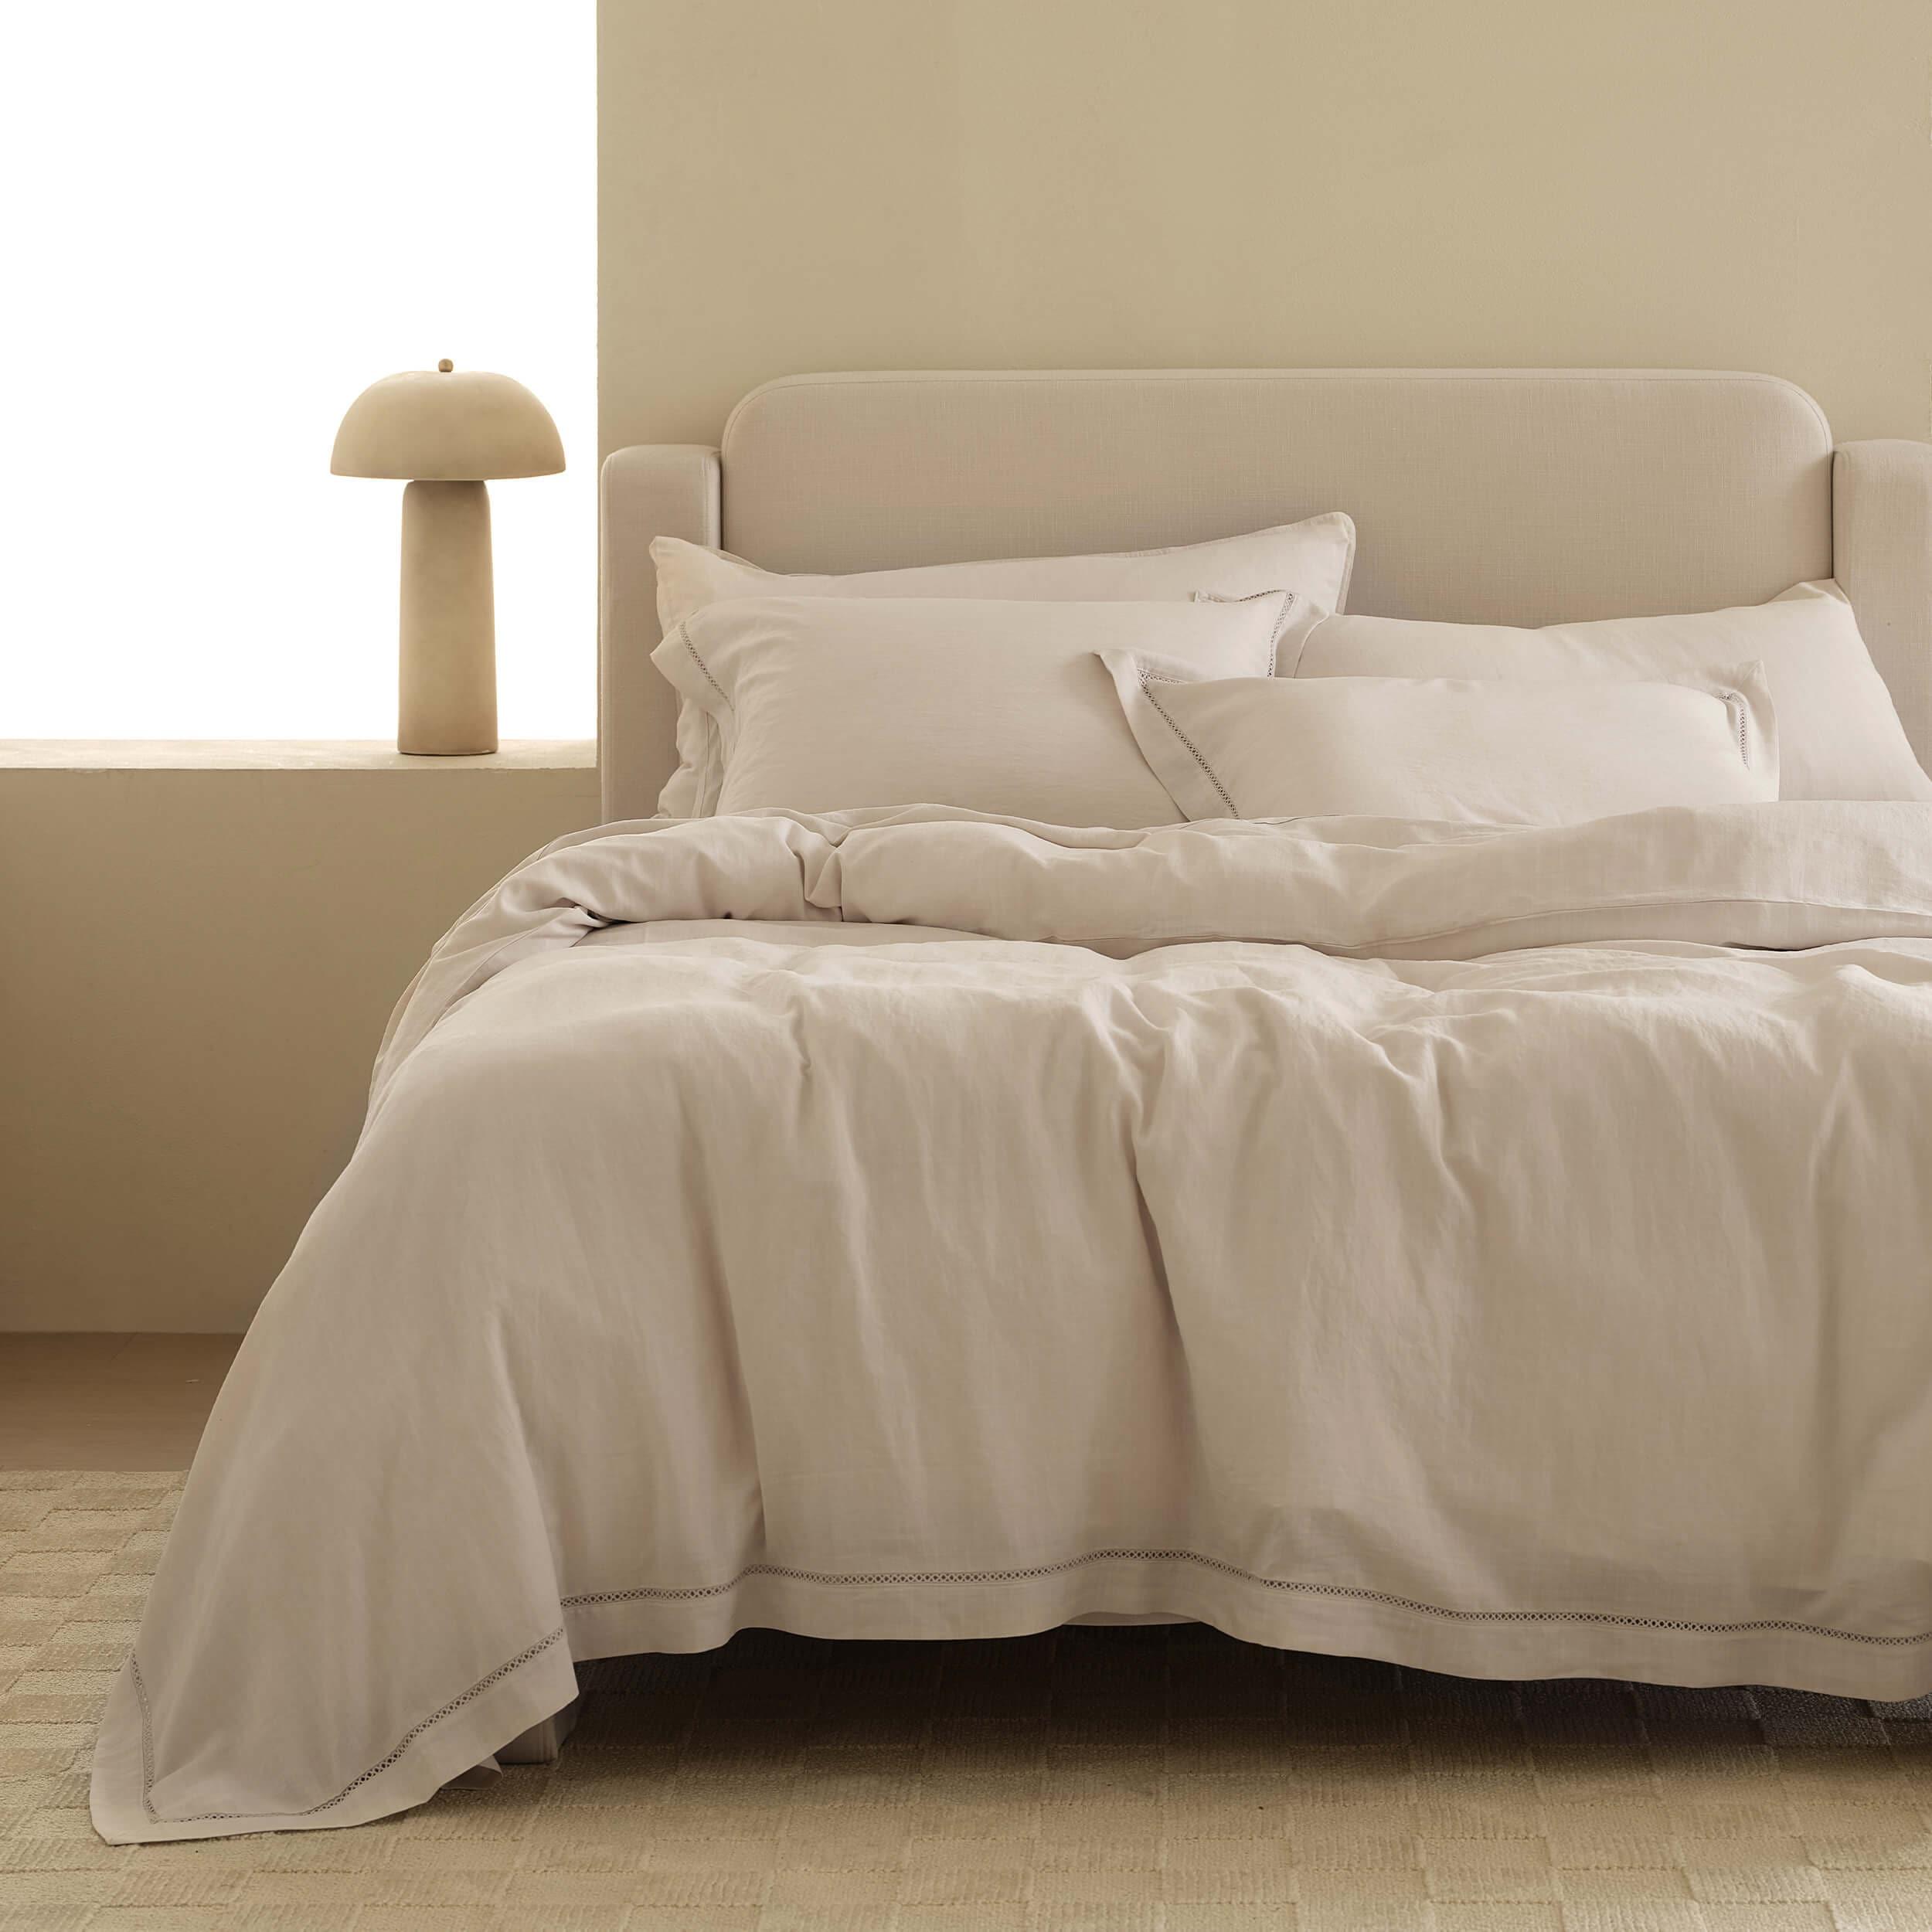 Discover the ultimate comfort and style with our queen duvet cover sets, featuring soft fabrics and trendy designs.